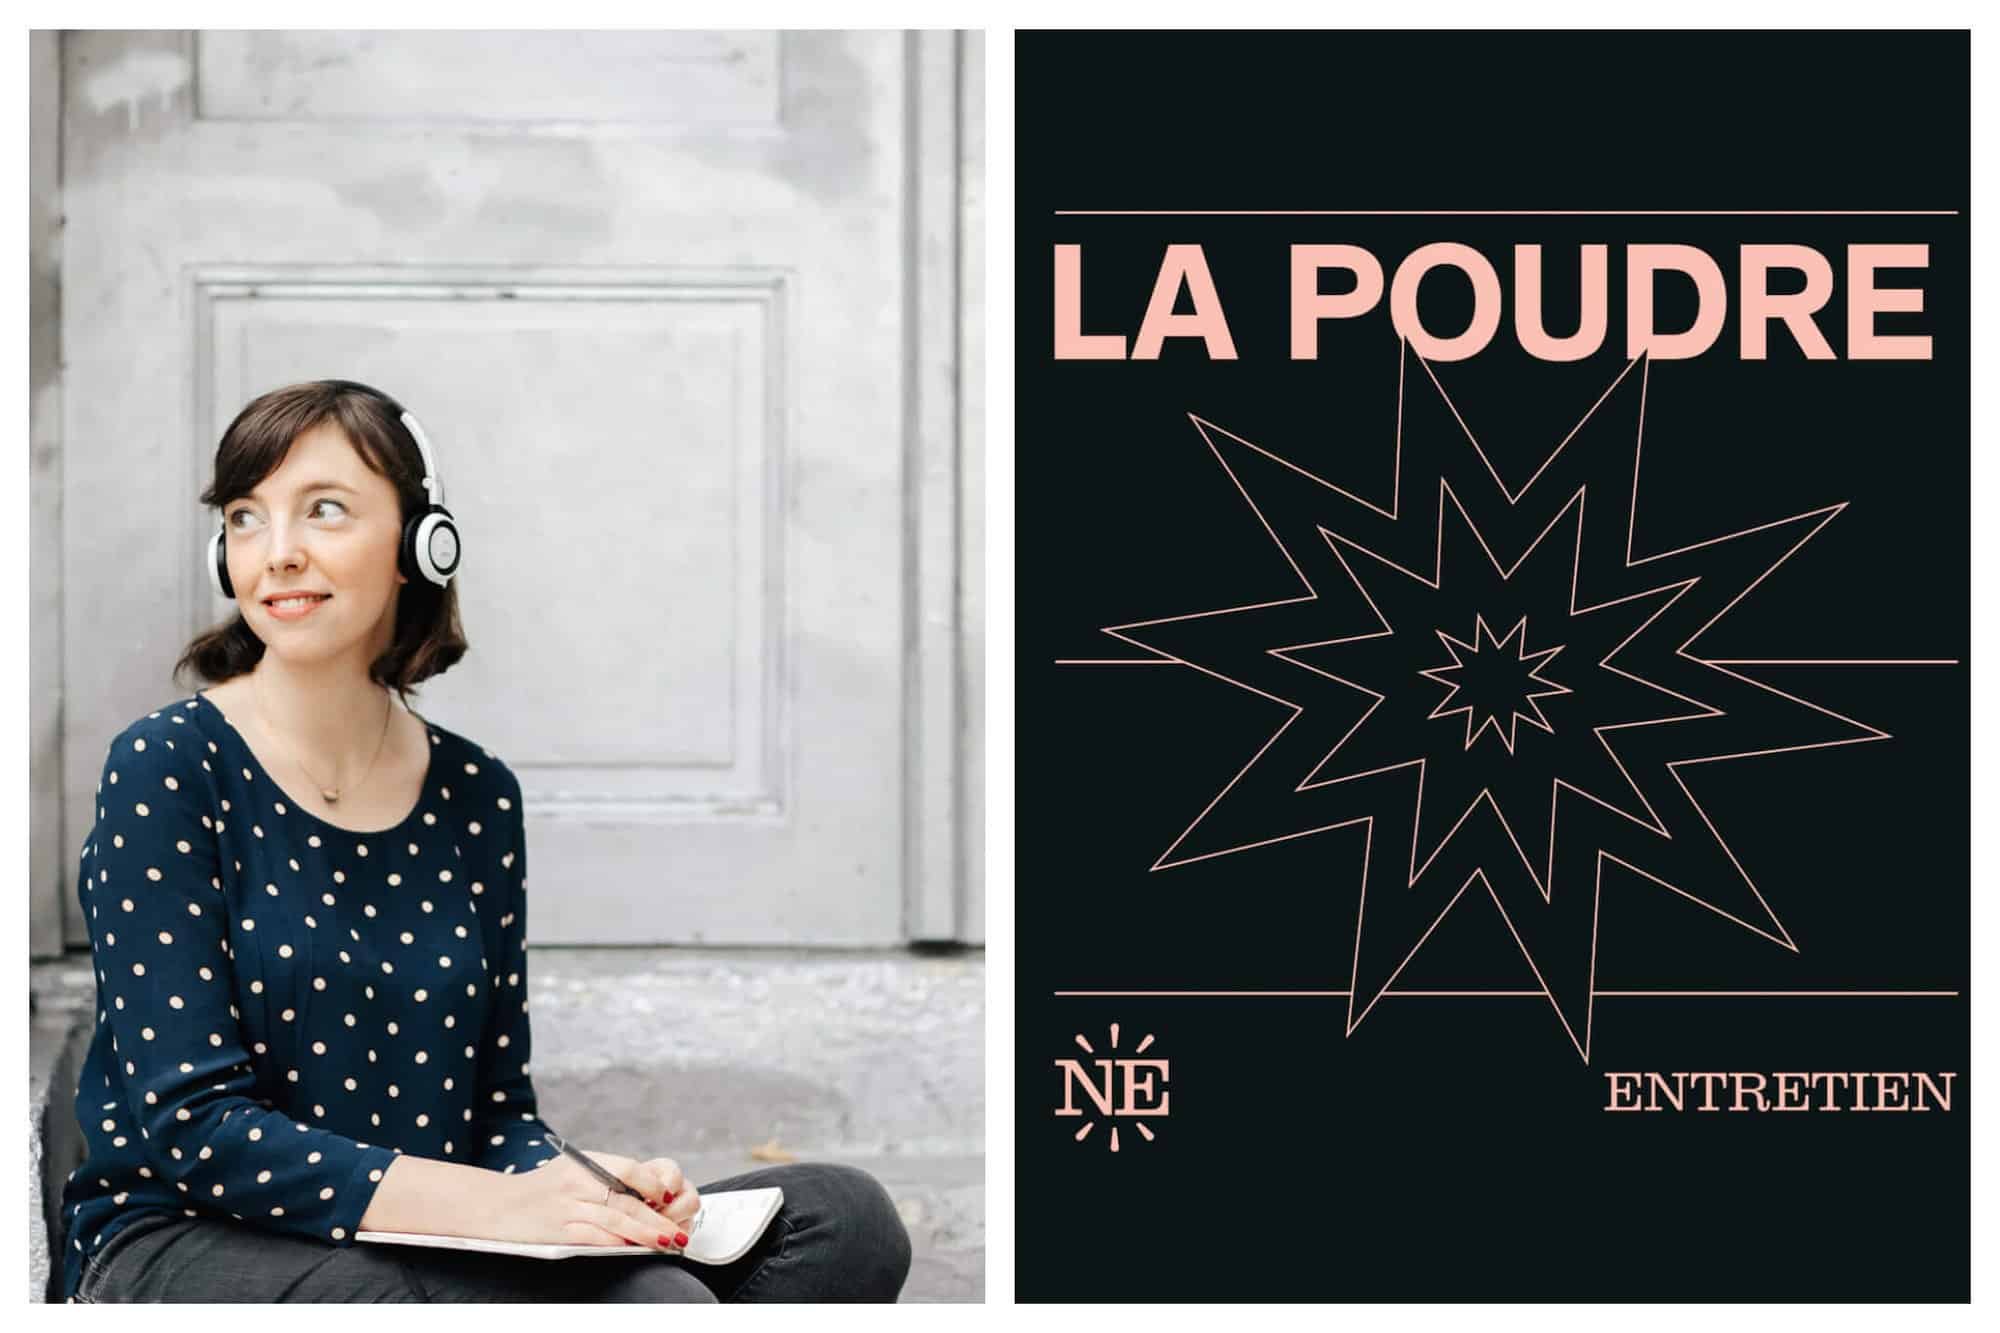 Left: Clotilde Dusoulier, host of the Change Ma Vie podcast, sits with a pair of headphones on her head and a pen in her hand. She smiles off to the distance, Right: Cover of La Poudre podcast, with the title written in bold pink type and an illustration of an explosion below it